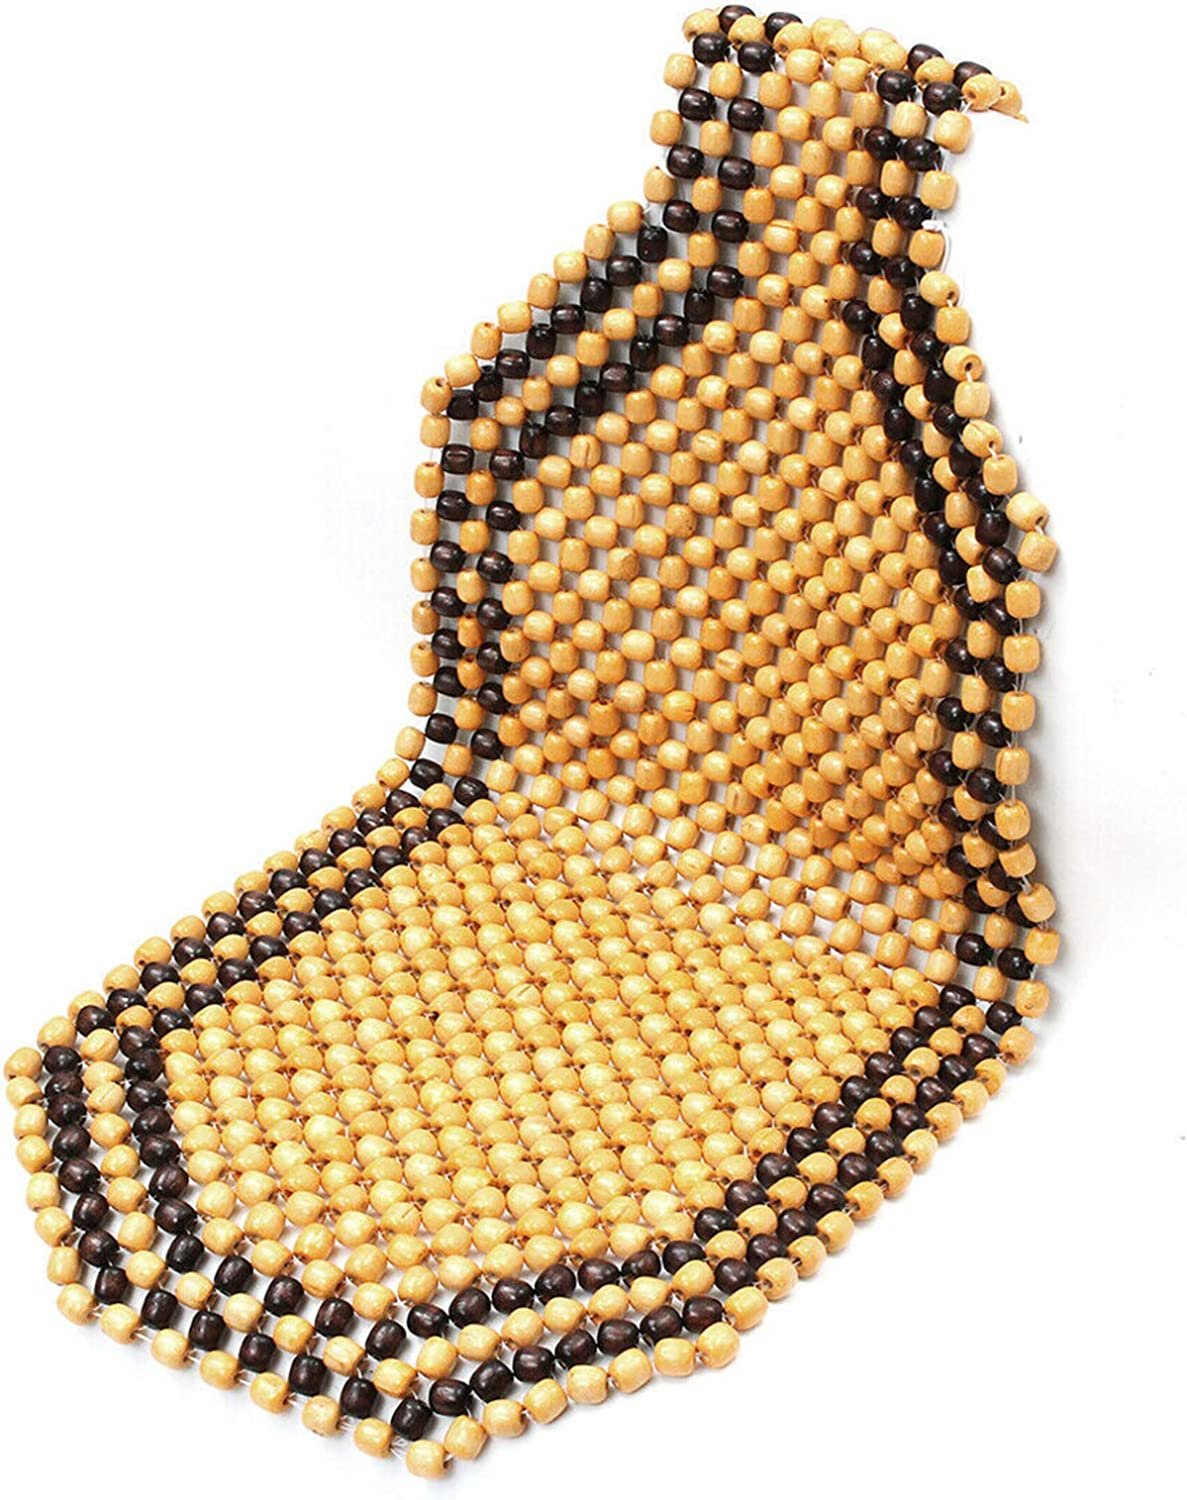 Wooden Beaded Seat For Car/Van/Tax, Massage Comfortable Wooden Seat Cushion | car seat beads | beaded car seat covers | beaded seat cover for car | beaded seat cover